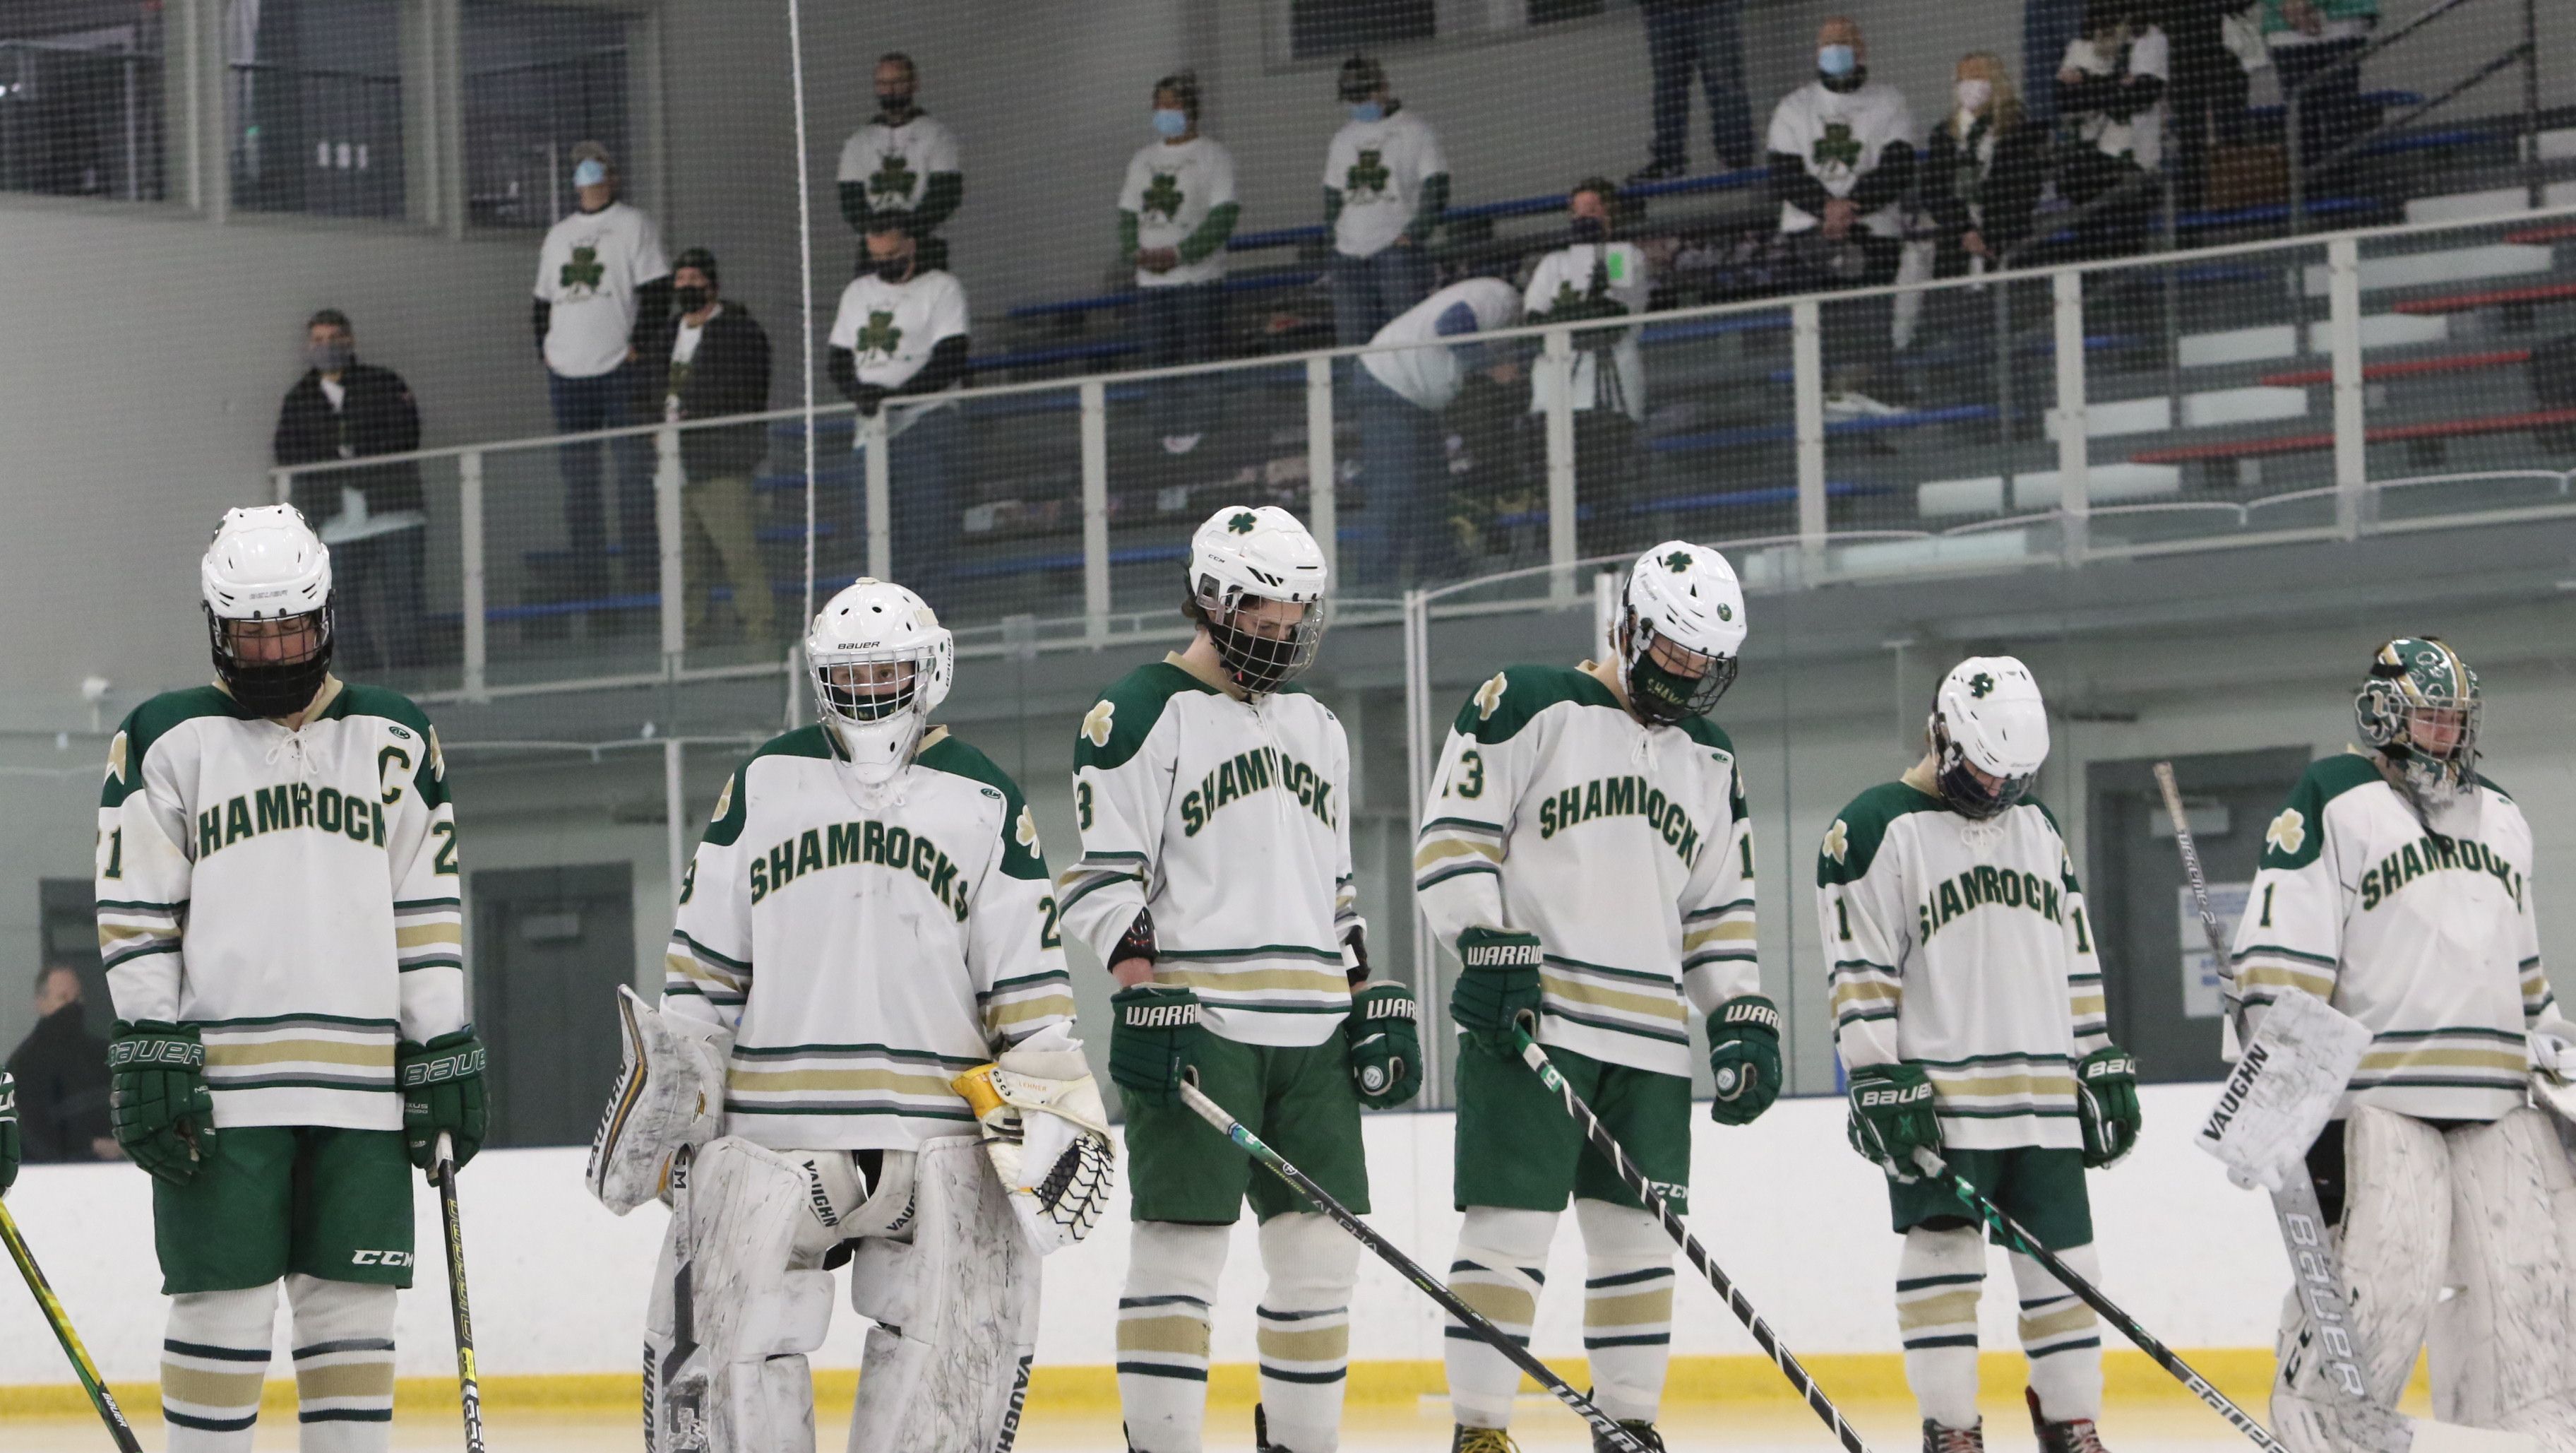 A.J. Quetta: Bruins rally to help injured Bishop Feehan hockey player